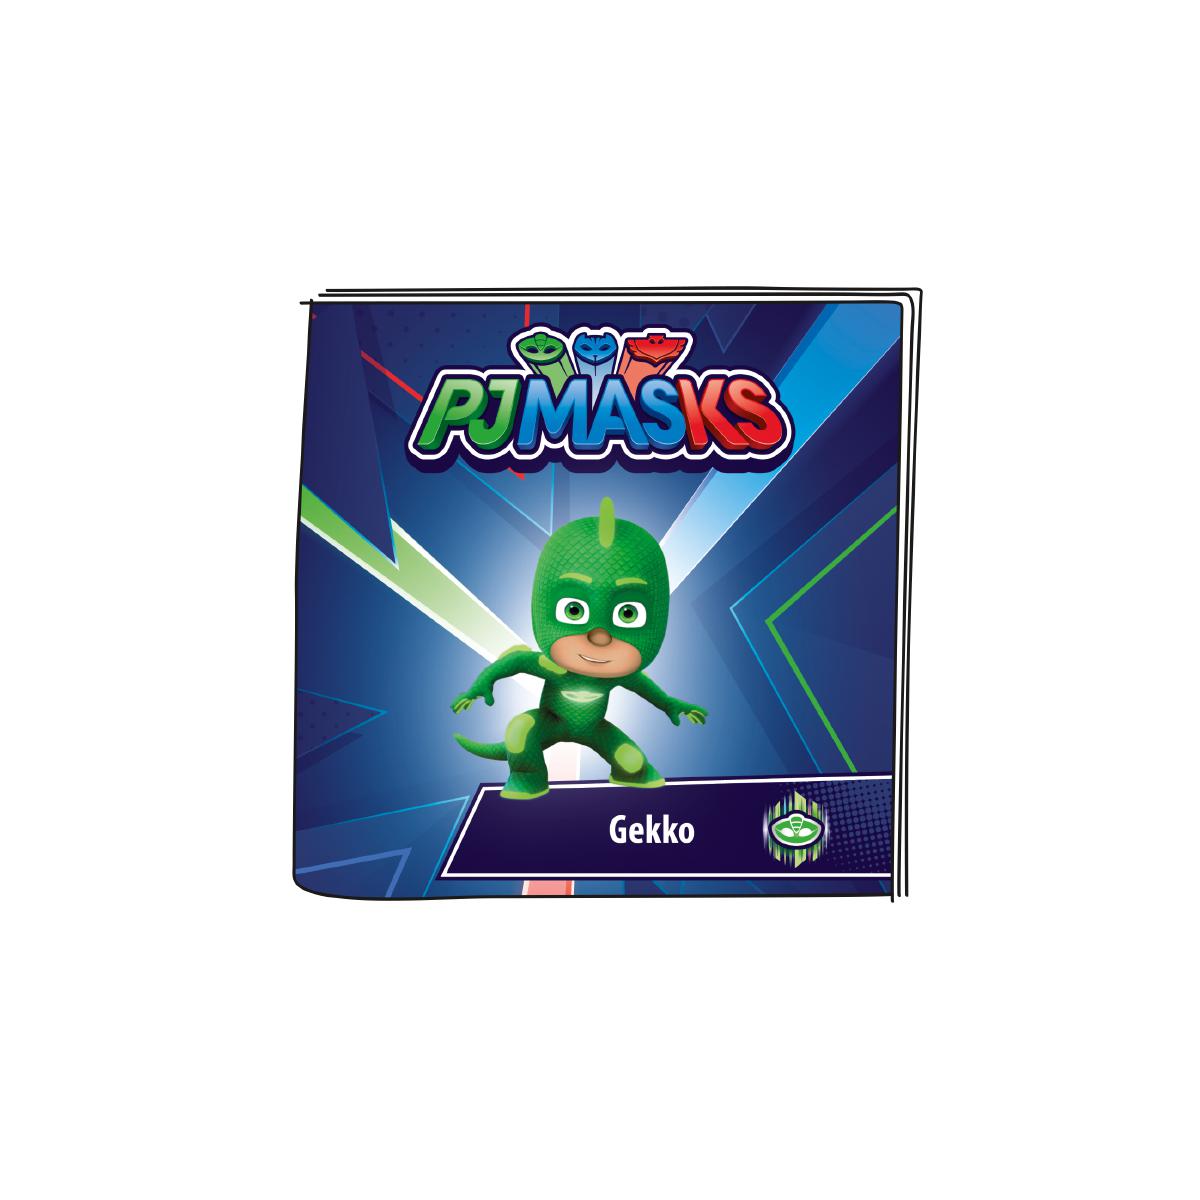 Tonies Pj Masks Gekko - Audio Character for use with Toniebox Player